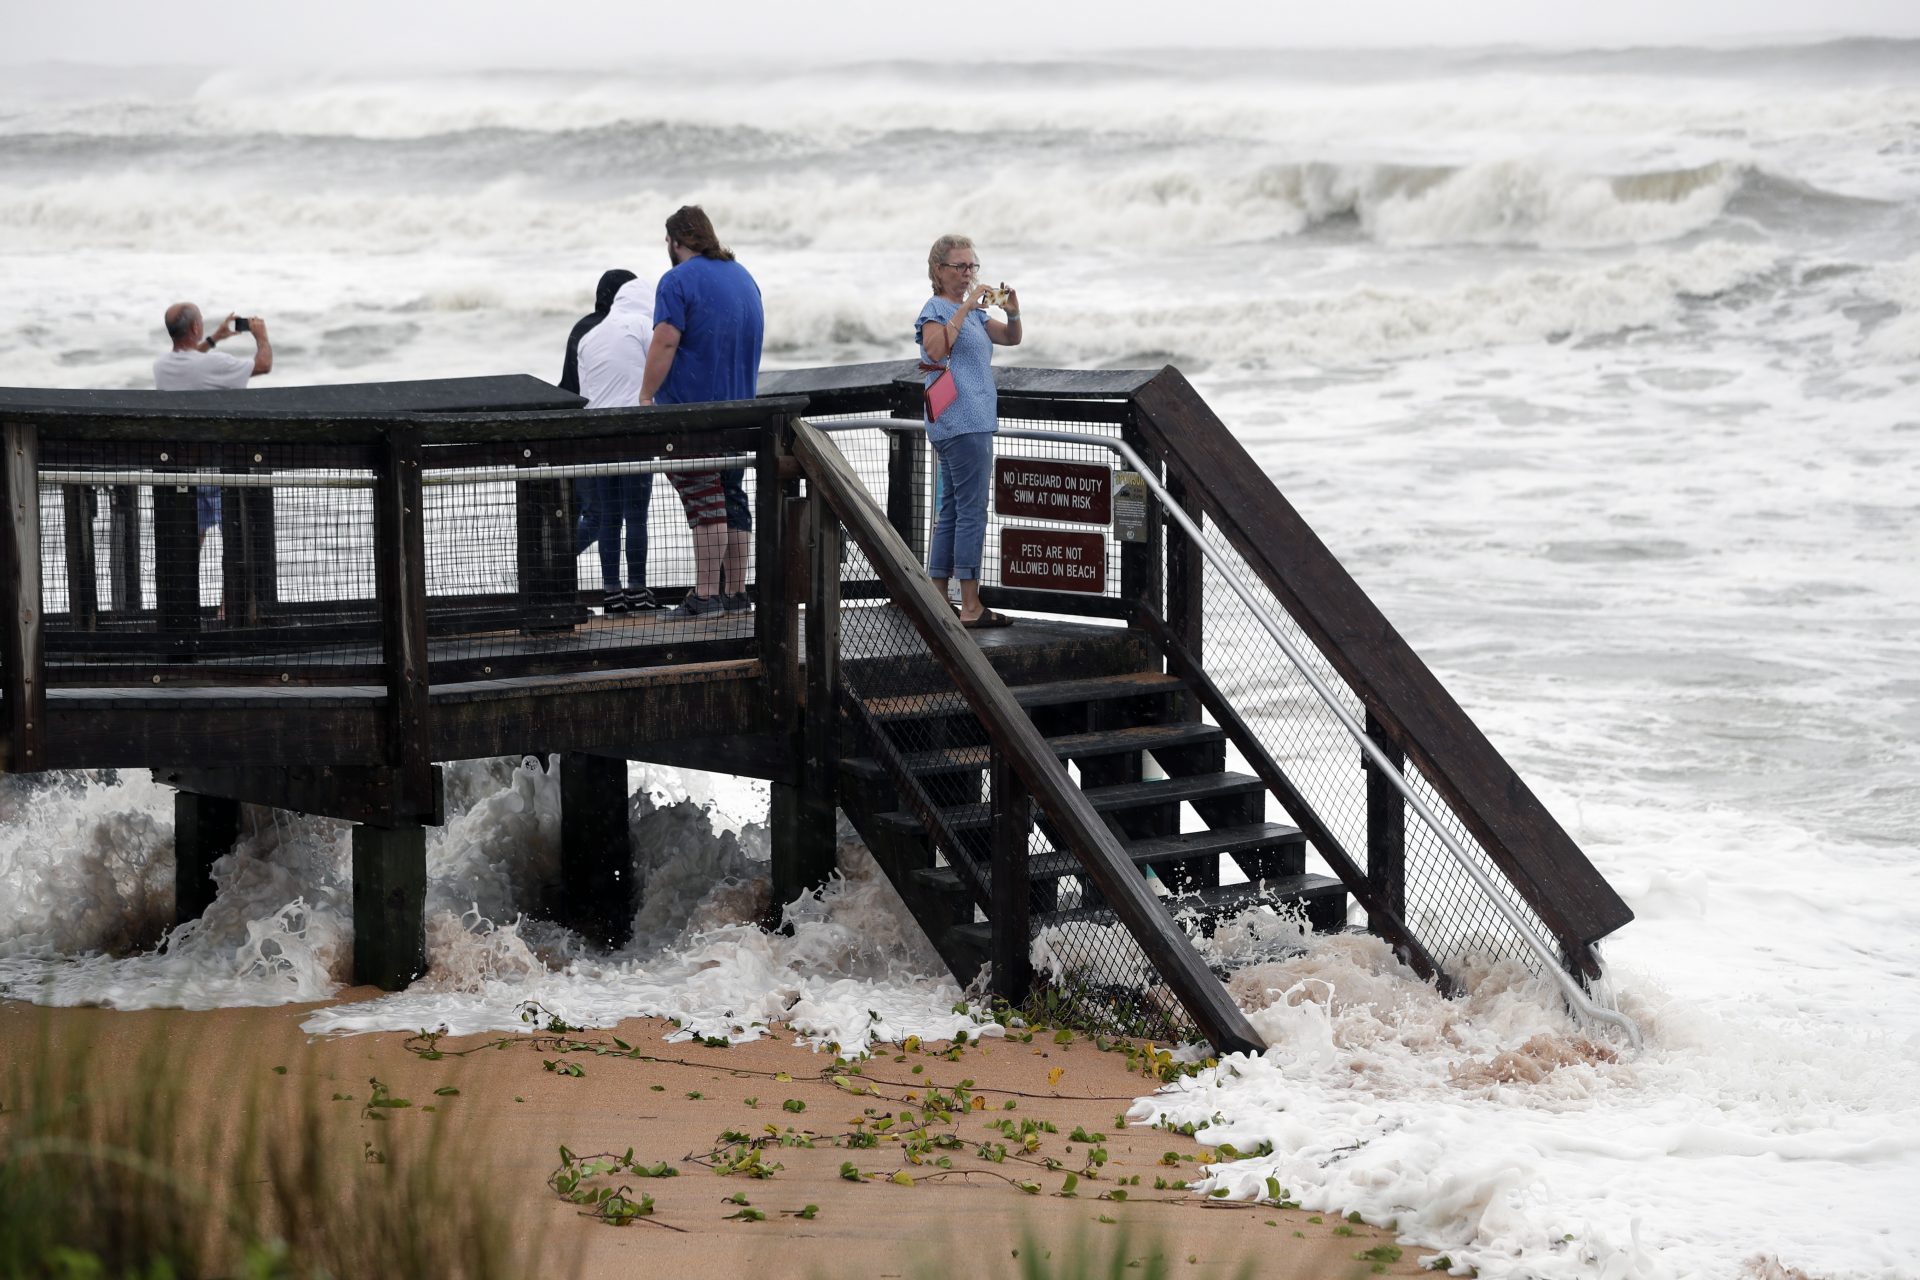 Sightseers watch waves crash on shore as Hurricane Dorian made its way off the Florida coast Wednesday, Sept. 4, 2019, in Ormond-by-the-Sea, Fla.